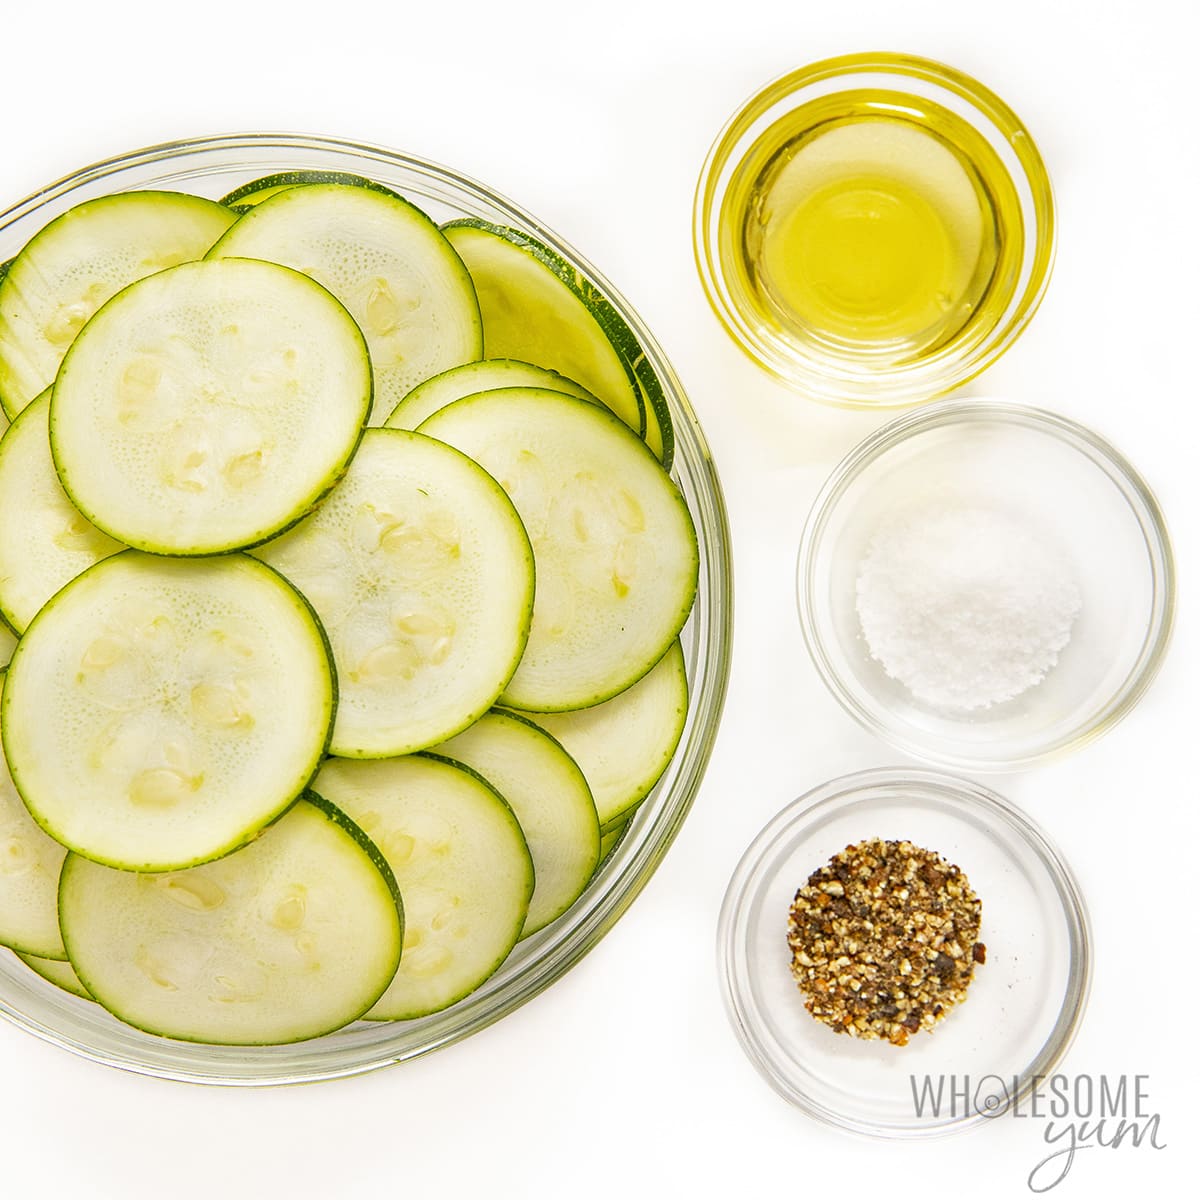 Ingredients to make zucchini chips in air fryer.